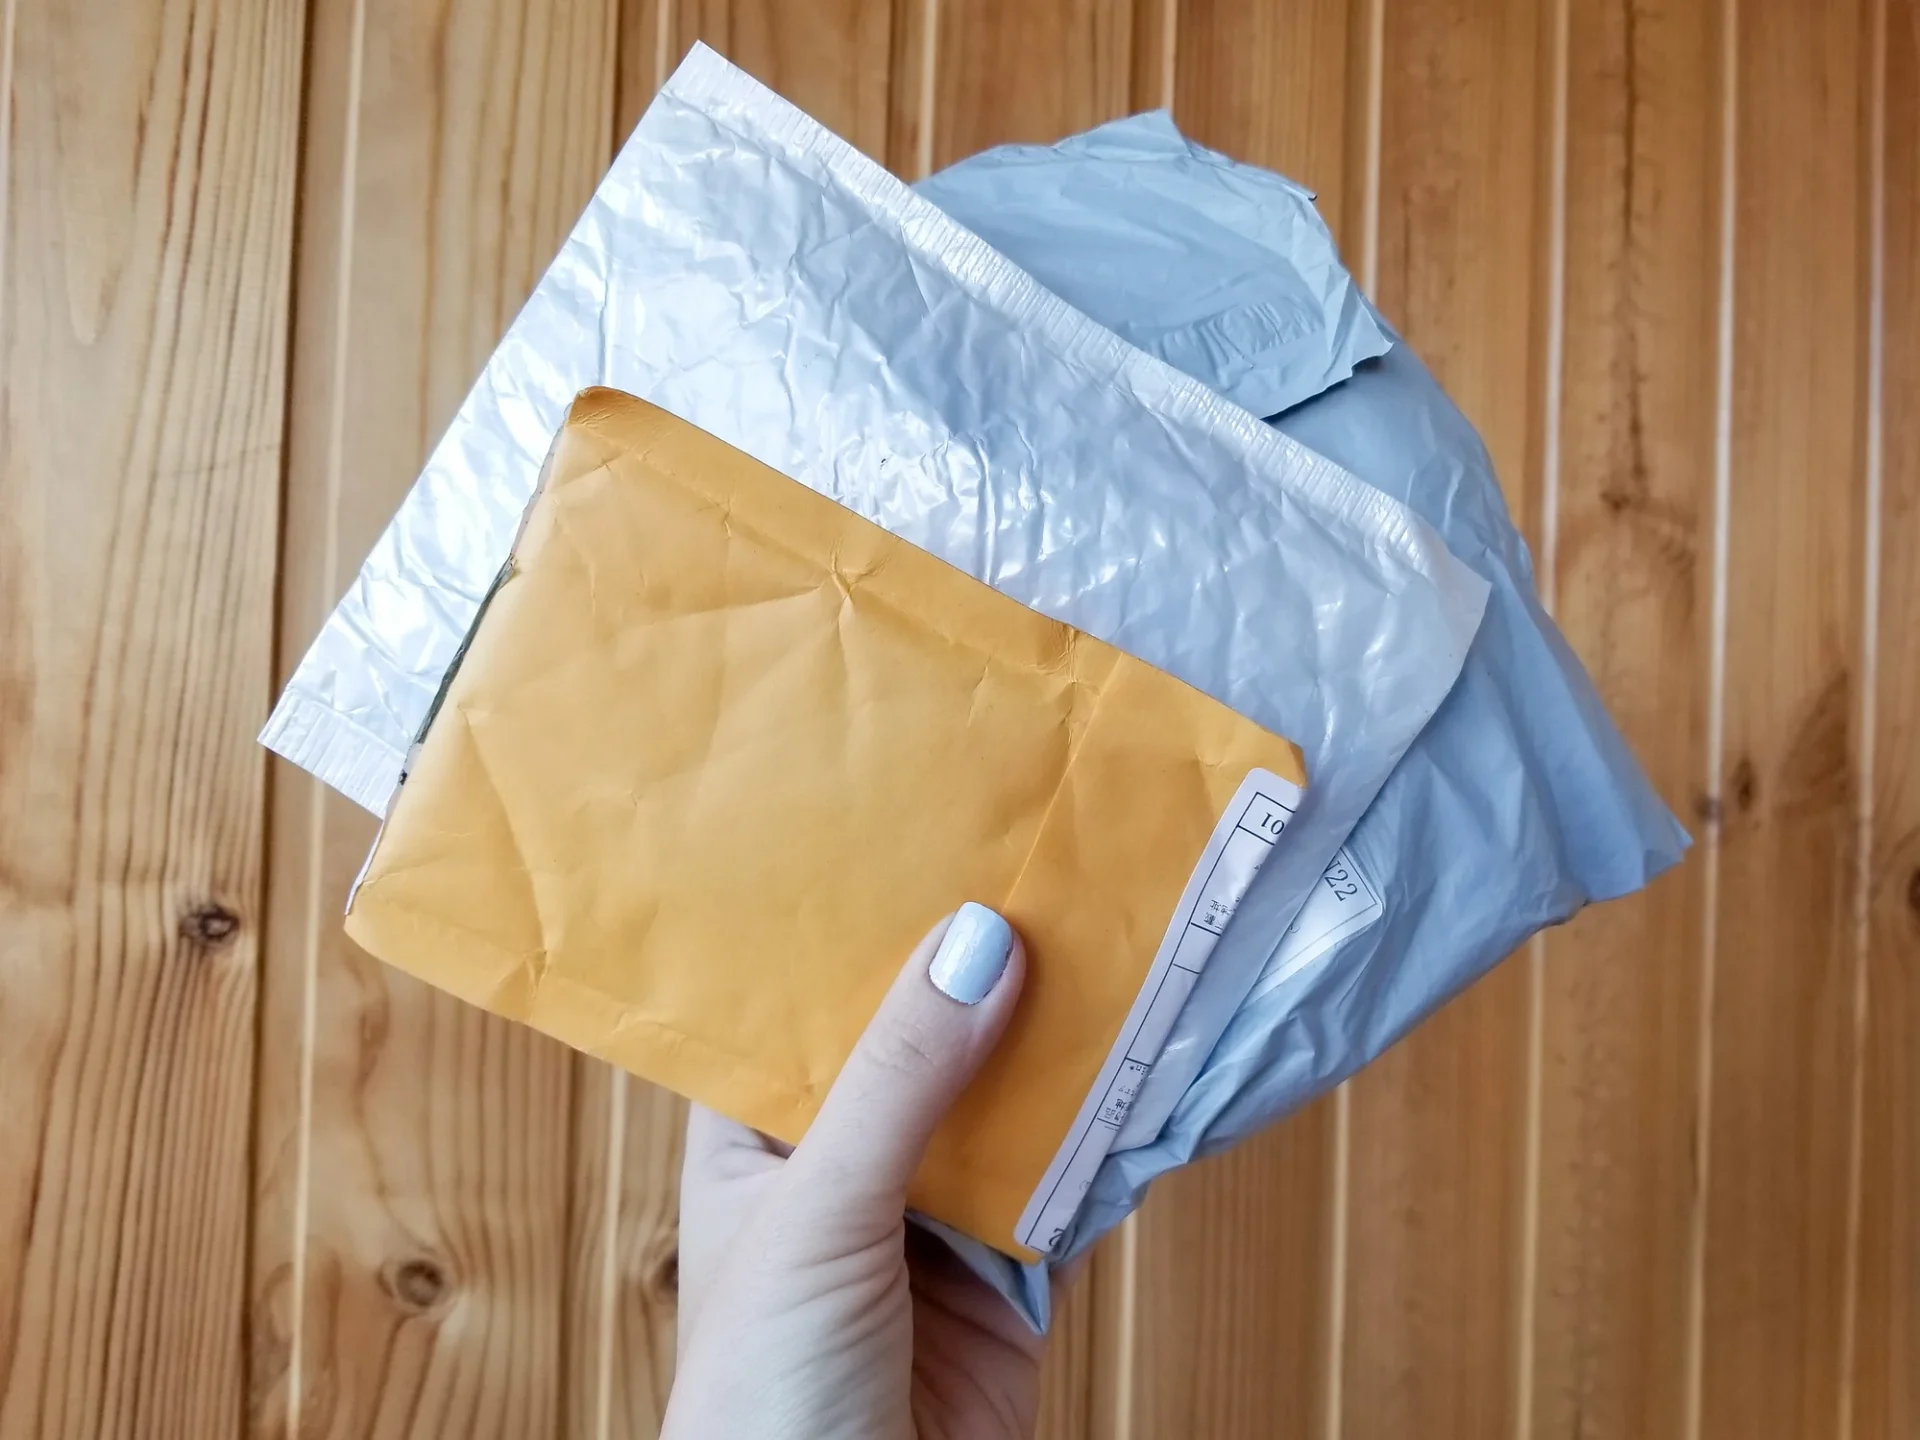 Woman's hand holding 3 postable sized parcels in envelope and silver packaging